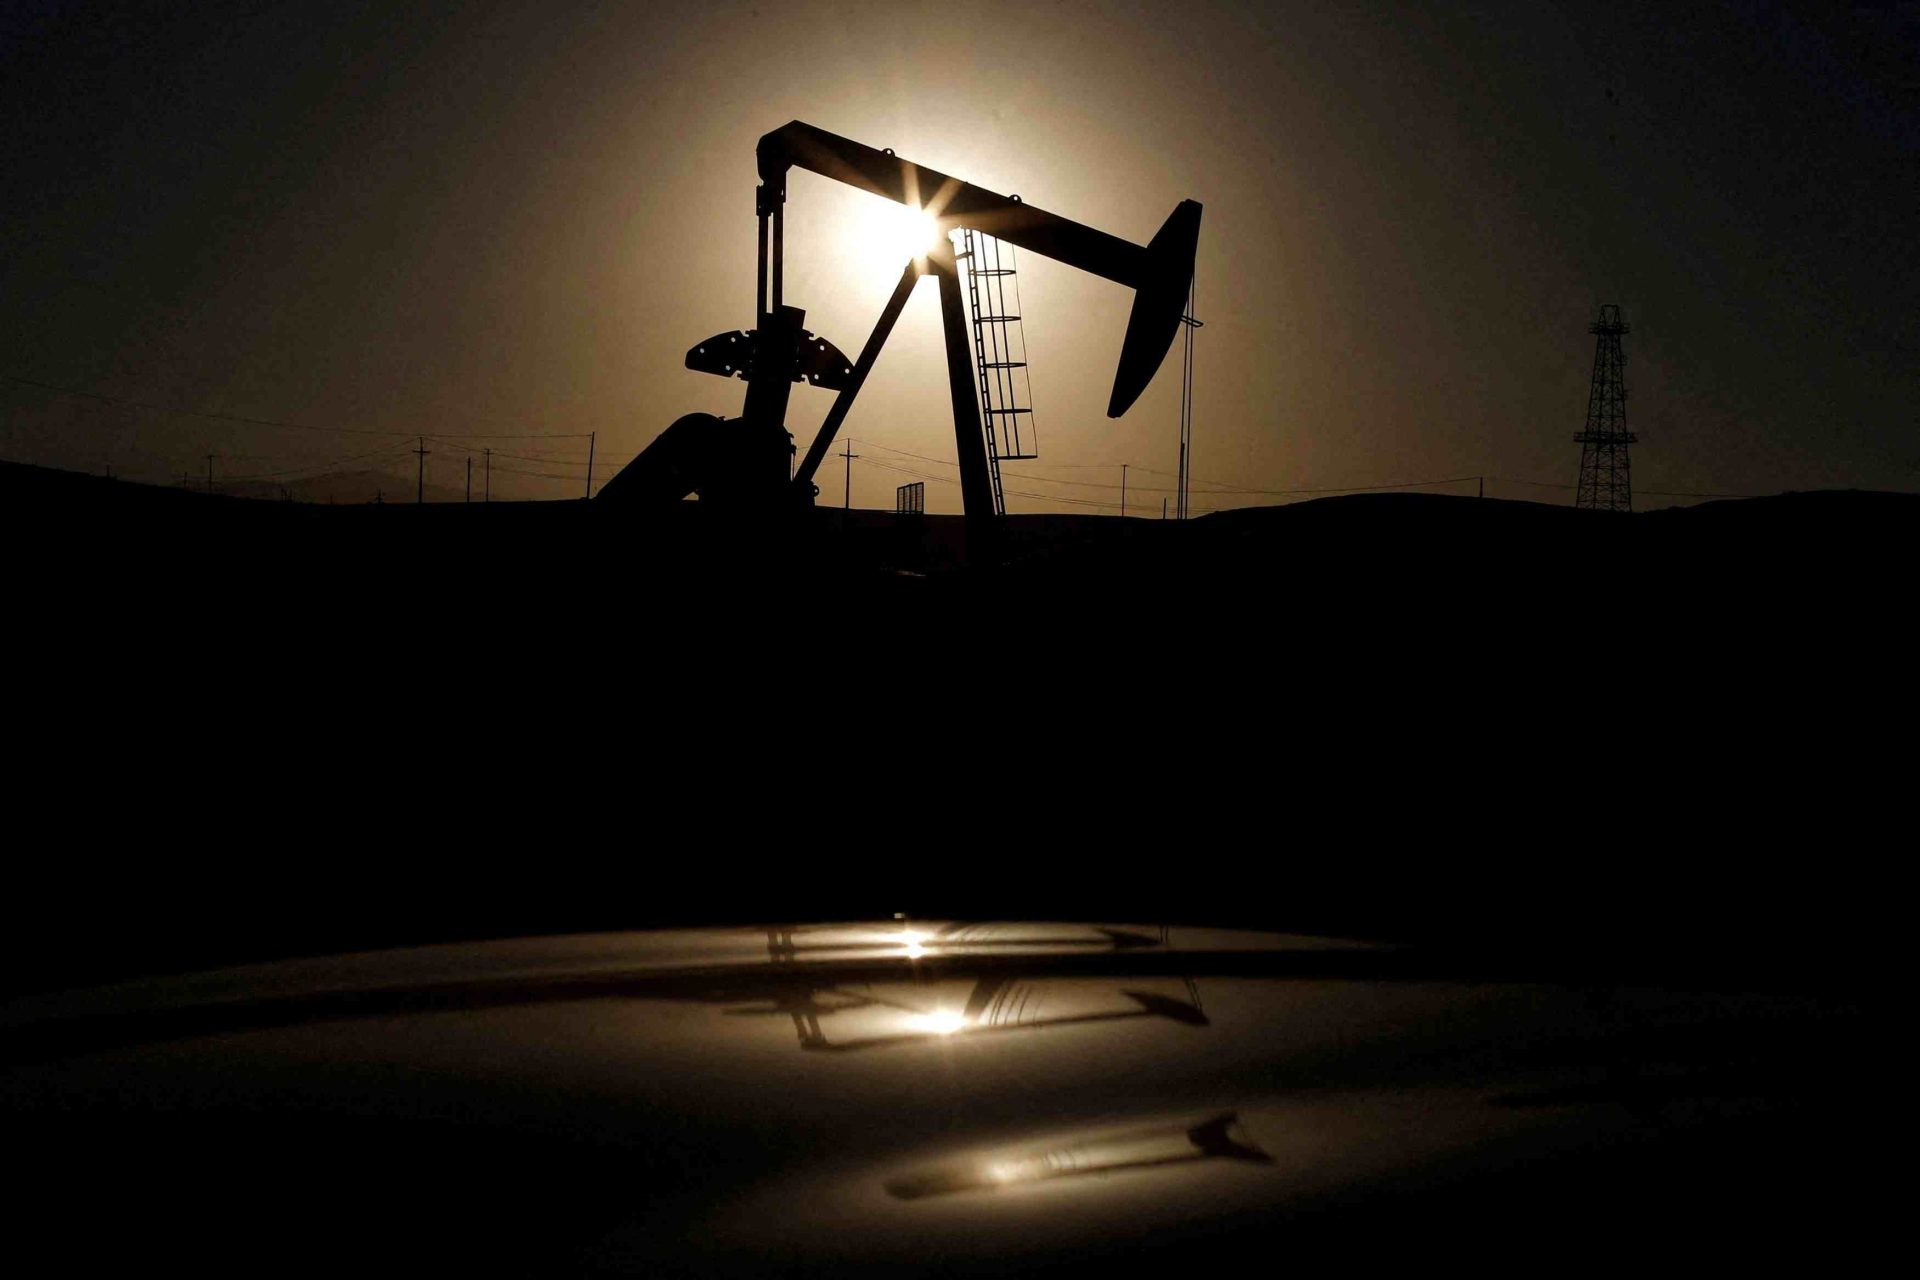 Oil prices have reversed their losses and are increasing due to fears about constrained supply